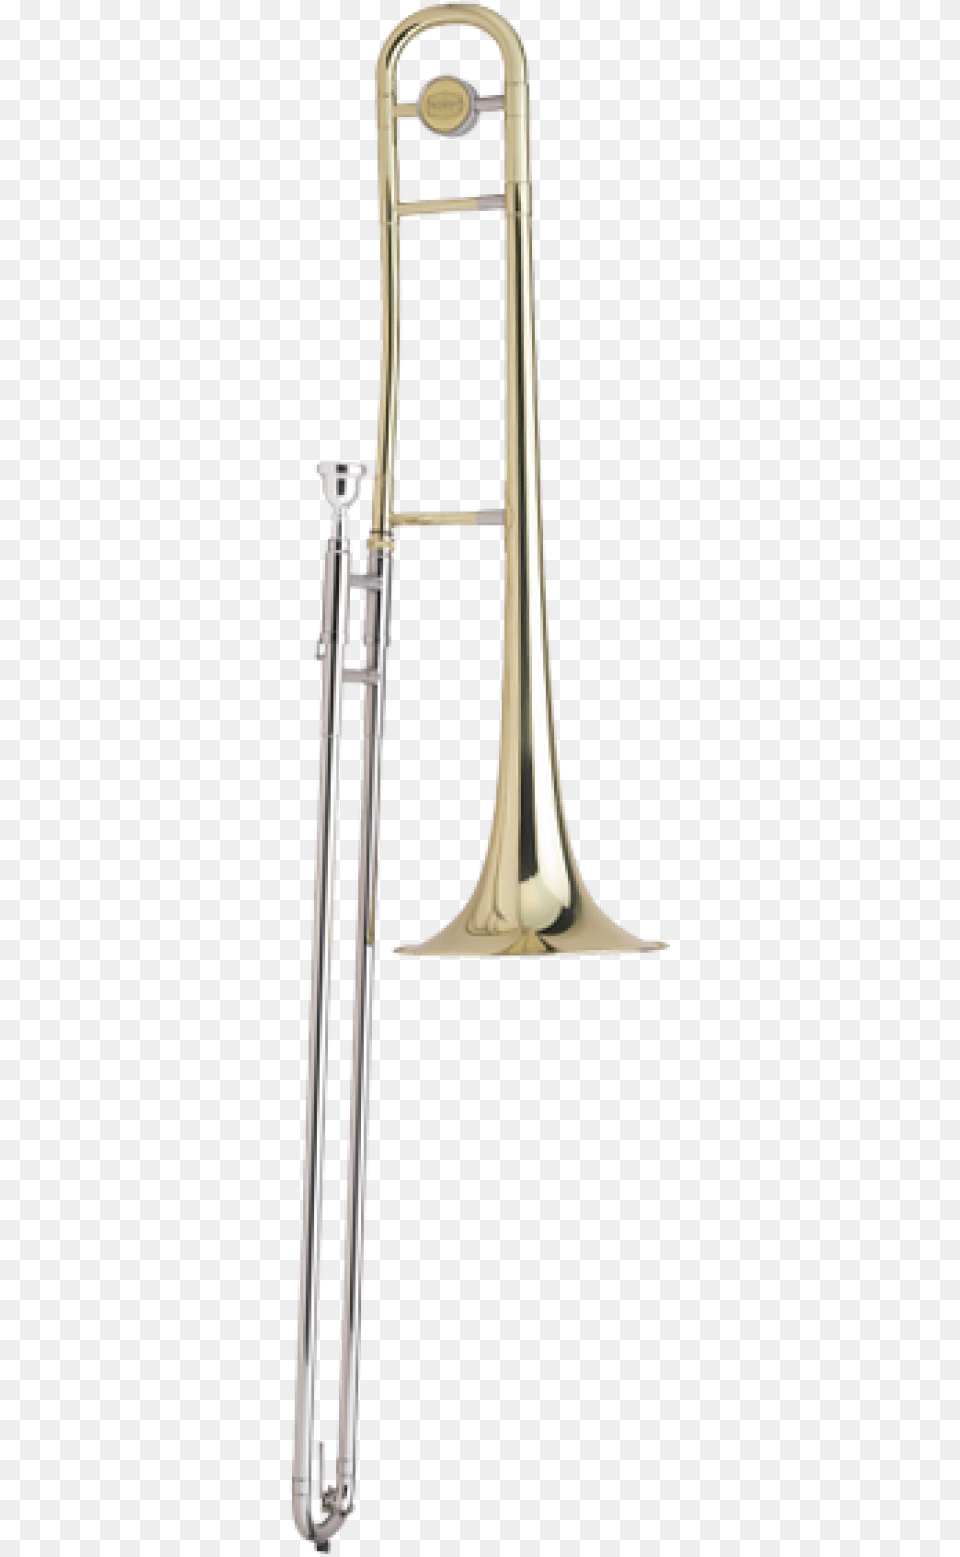 Types Of Trombone, Musical Instrument, Brass Section Free Png